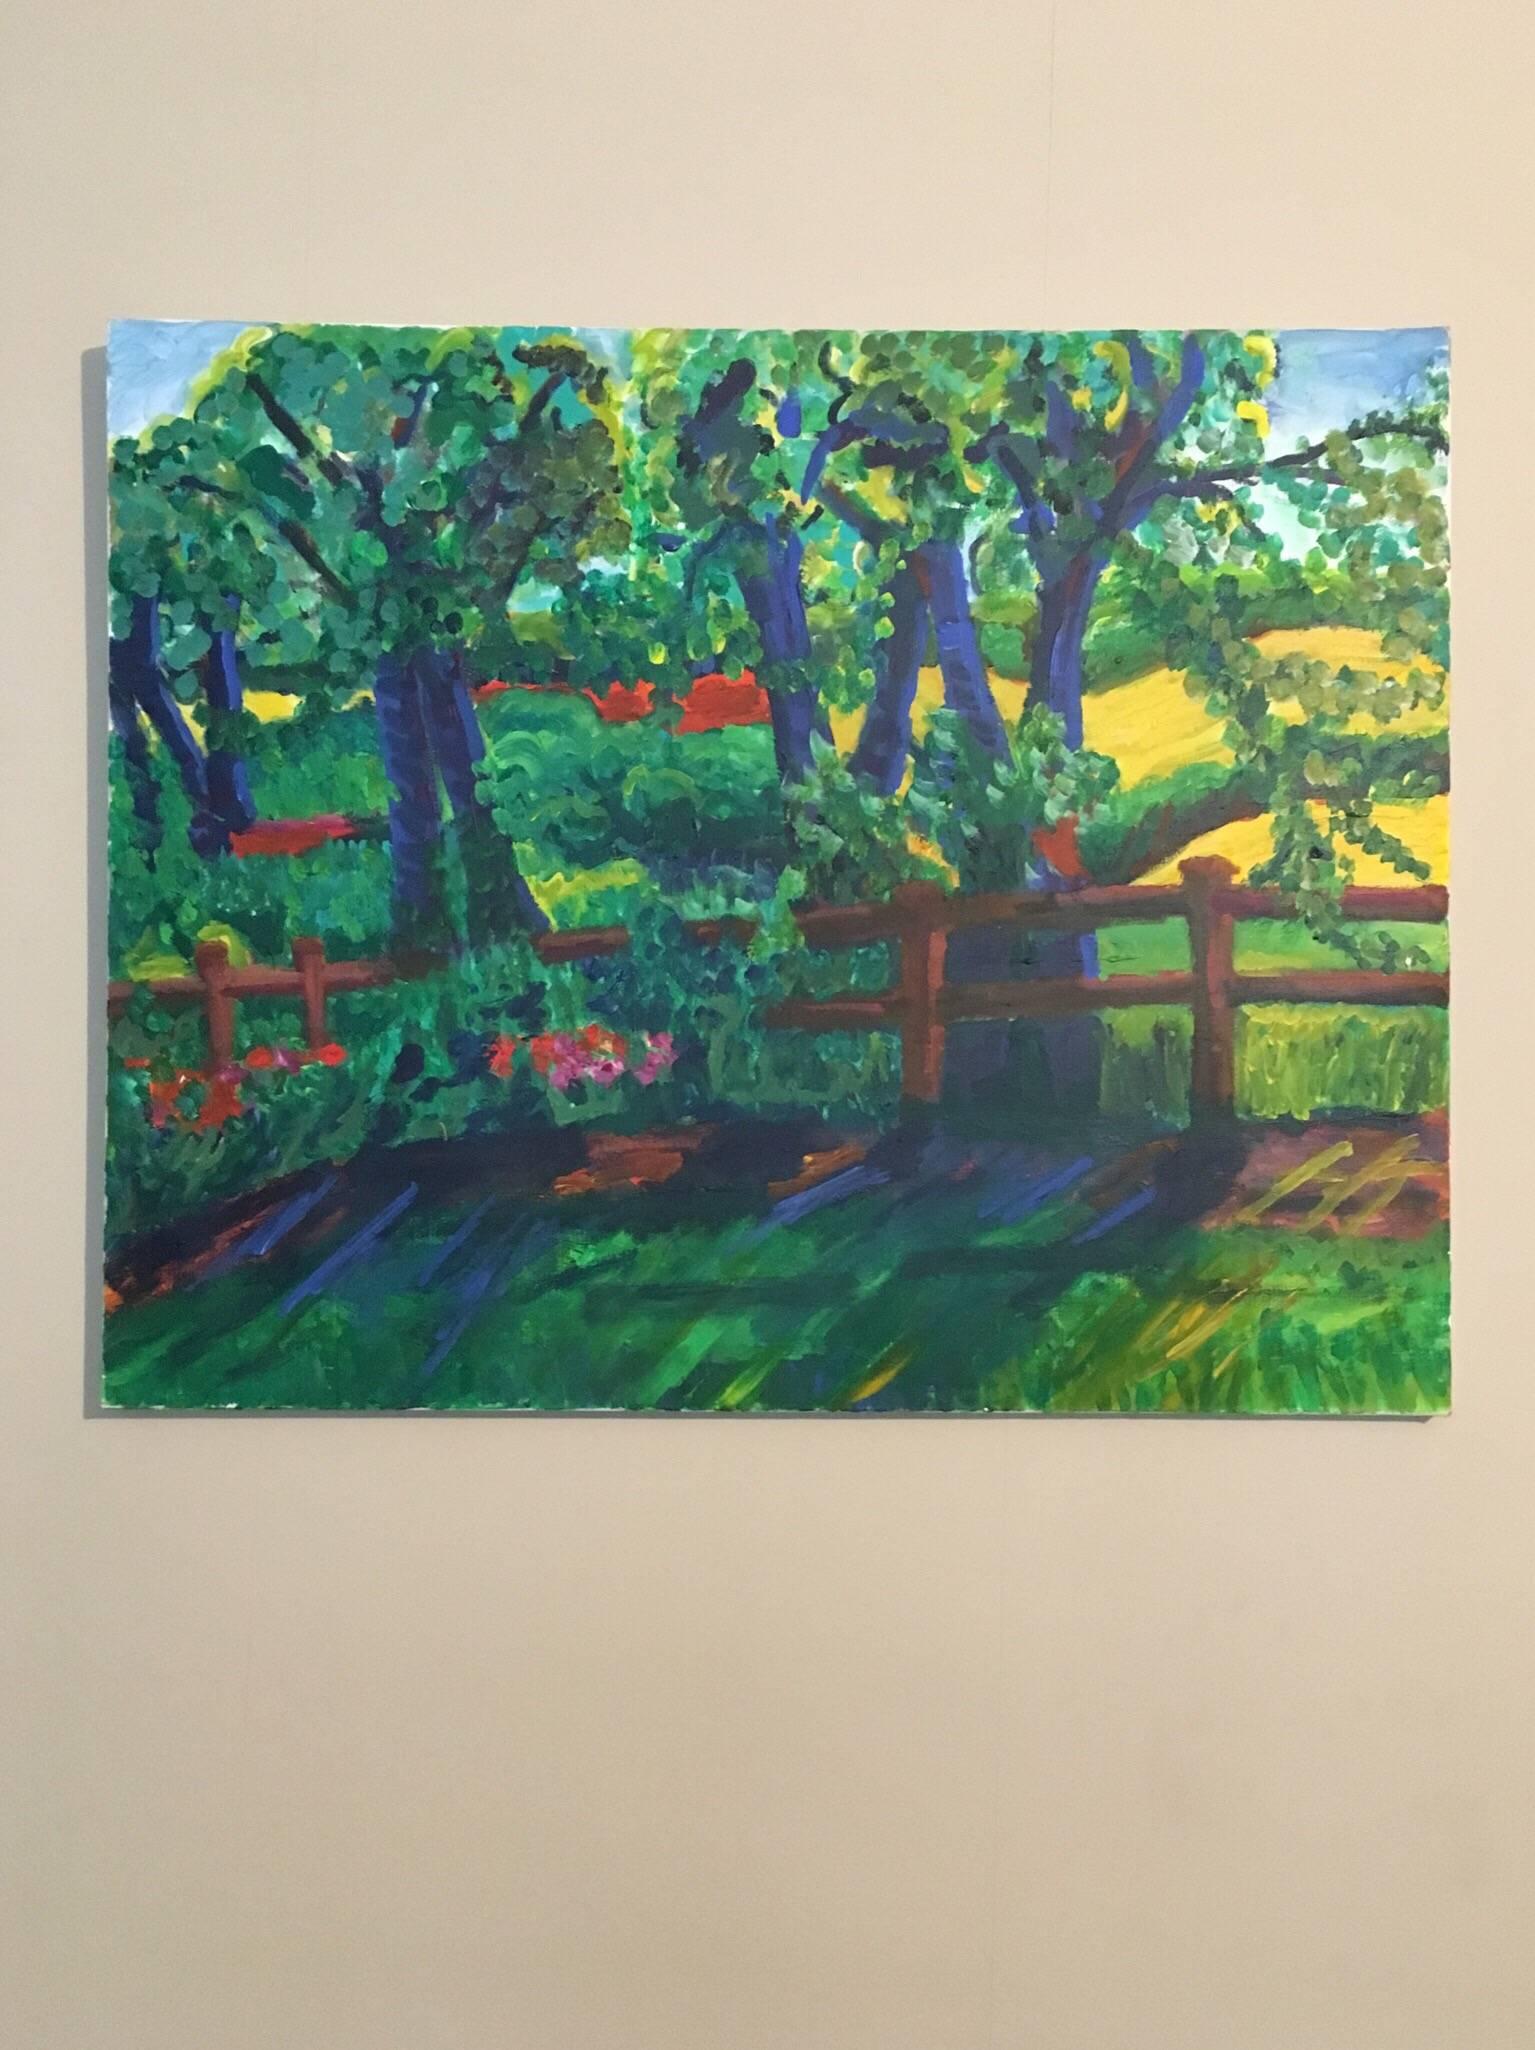 Impressionist Country Lane, British Artist
by Pamela Cawley, British 20th century
oil painting on canvas, unframed

canvas: 32 x 39.5 inches 

Stunning original Impressionist oil painting by the 20th century British artist, Pamela Cawley. The work